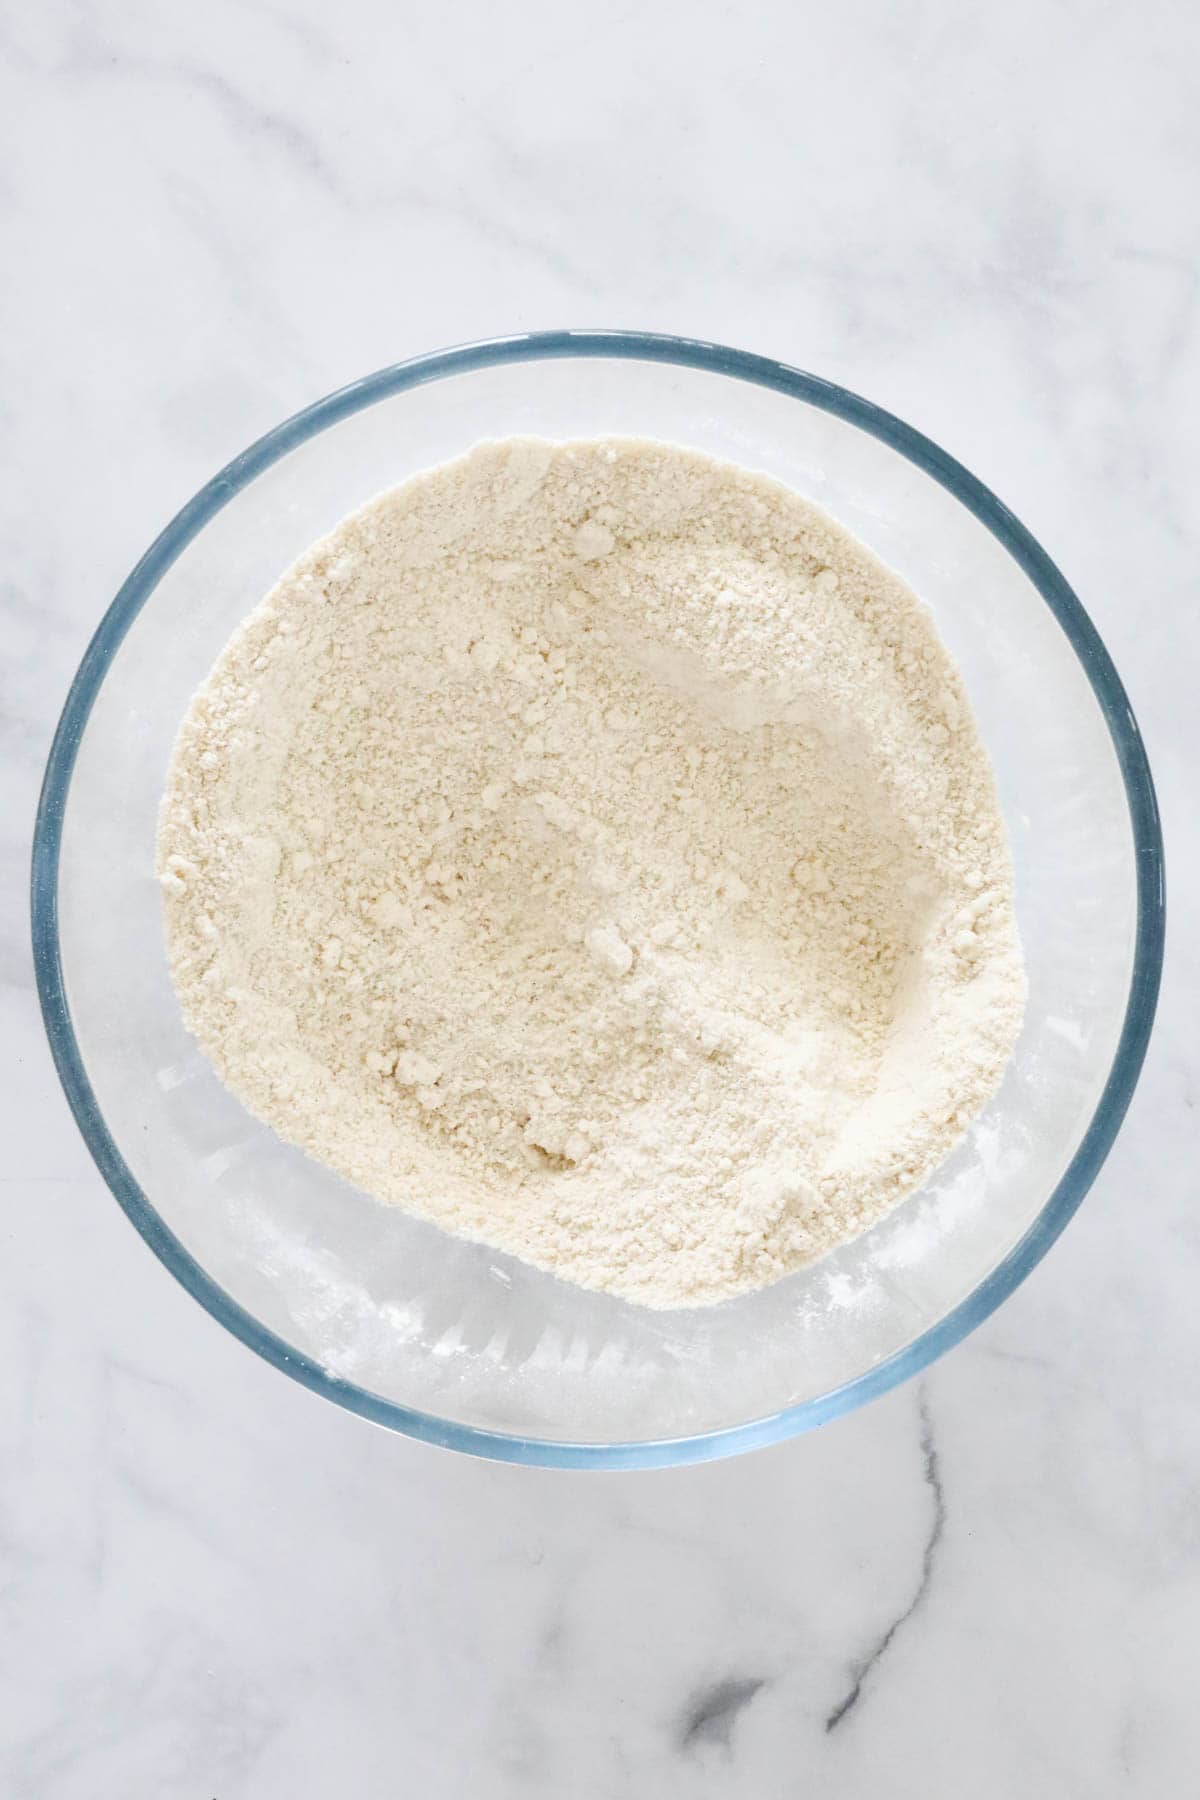 Dry ingredients mixed in a glass bowl, with a hollow made in the centre of the flour mix.